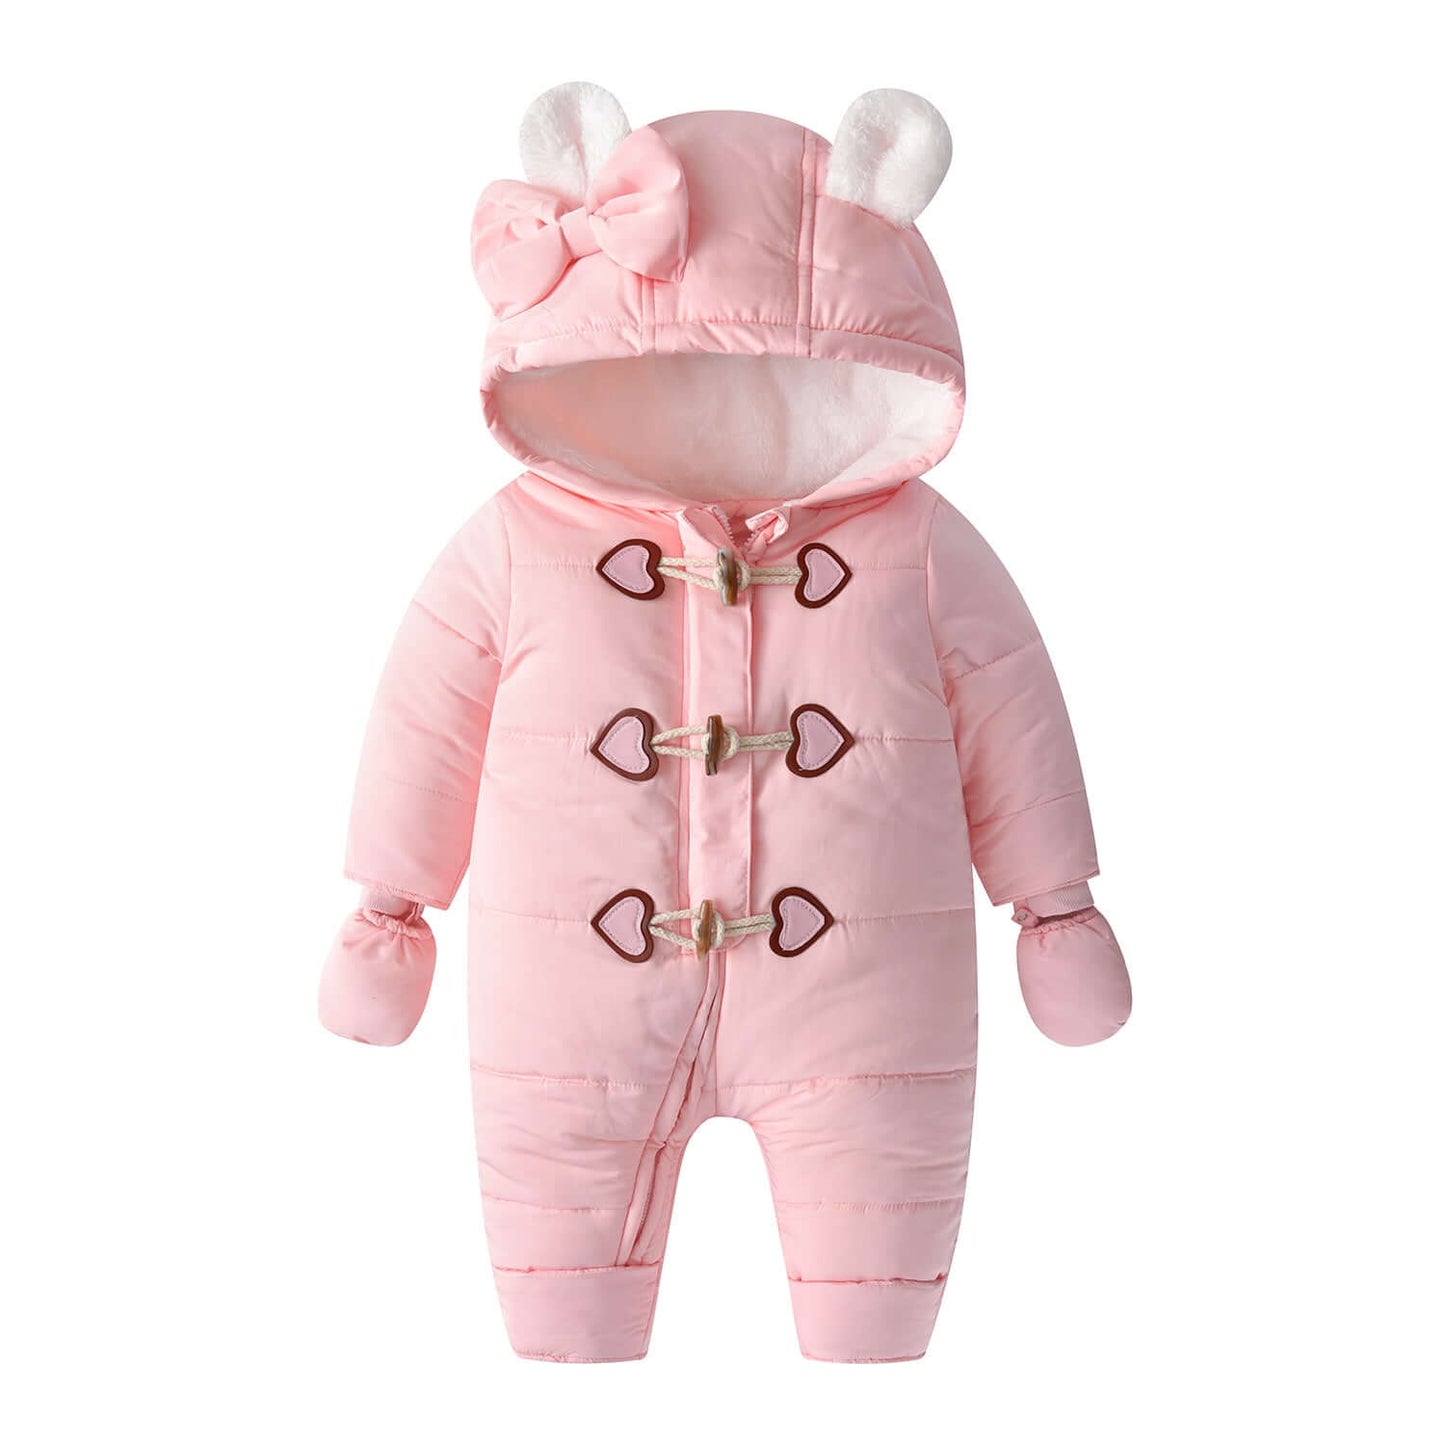 Baby Onesie Horn Buckle Hayi Baby Crawling Suit Clothes